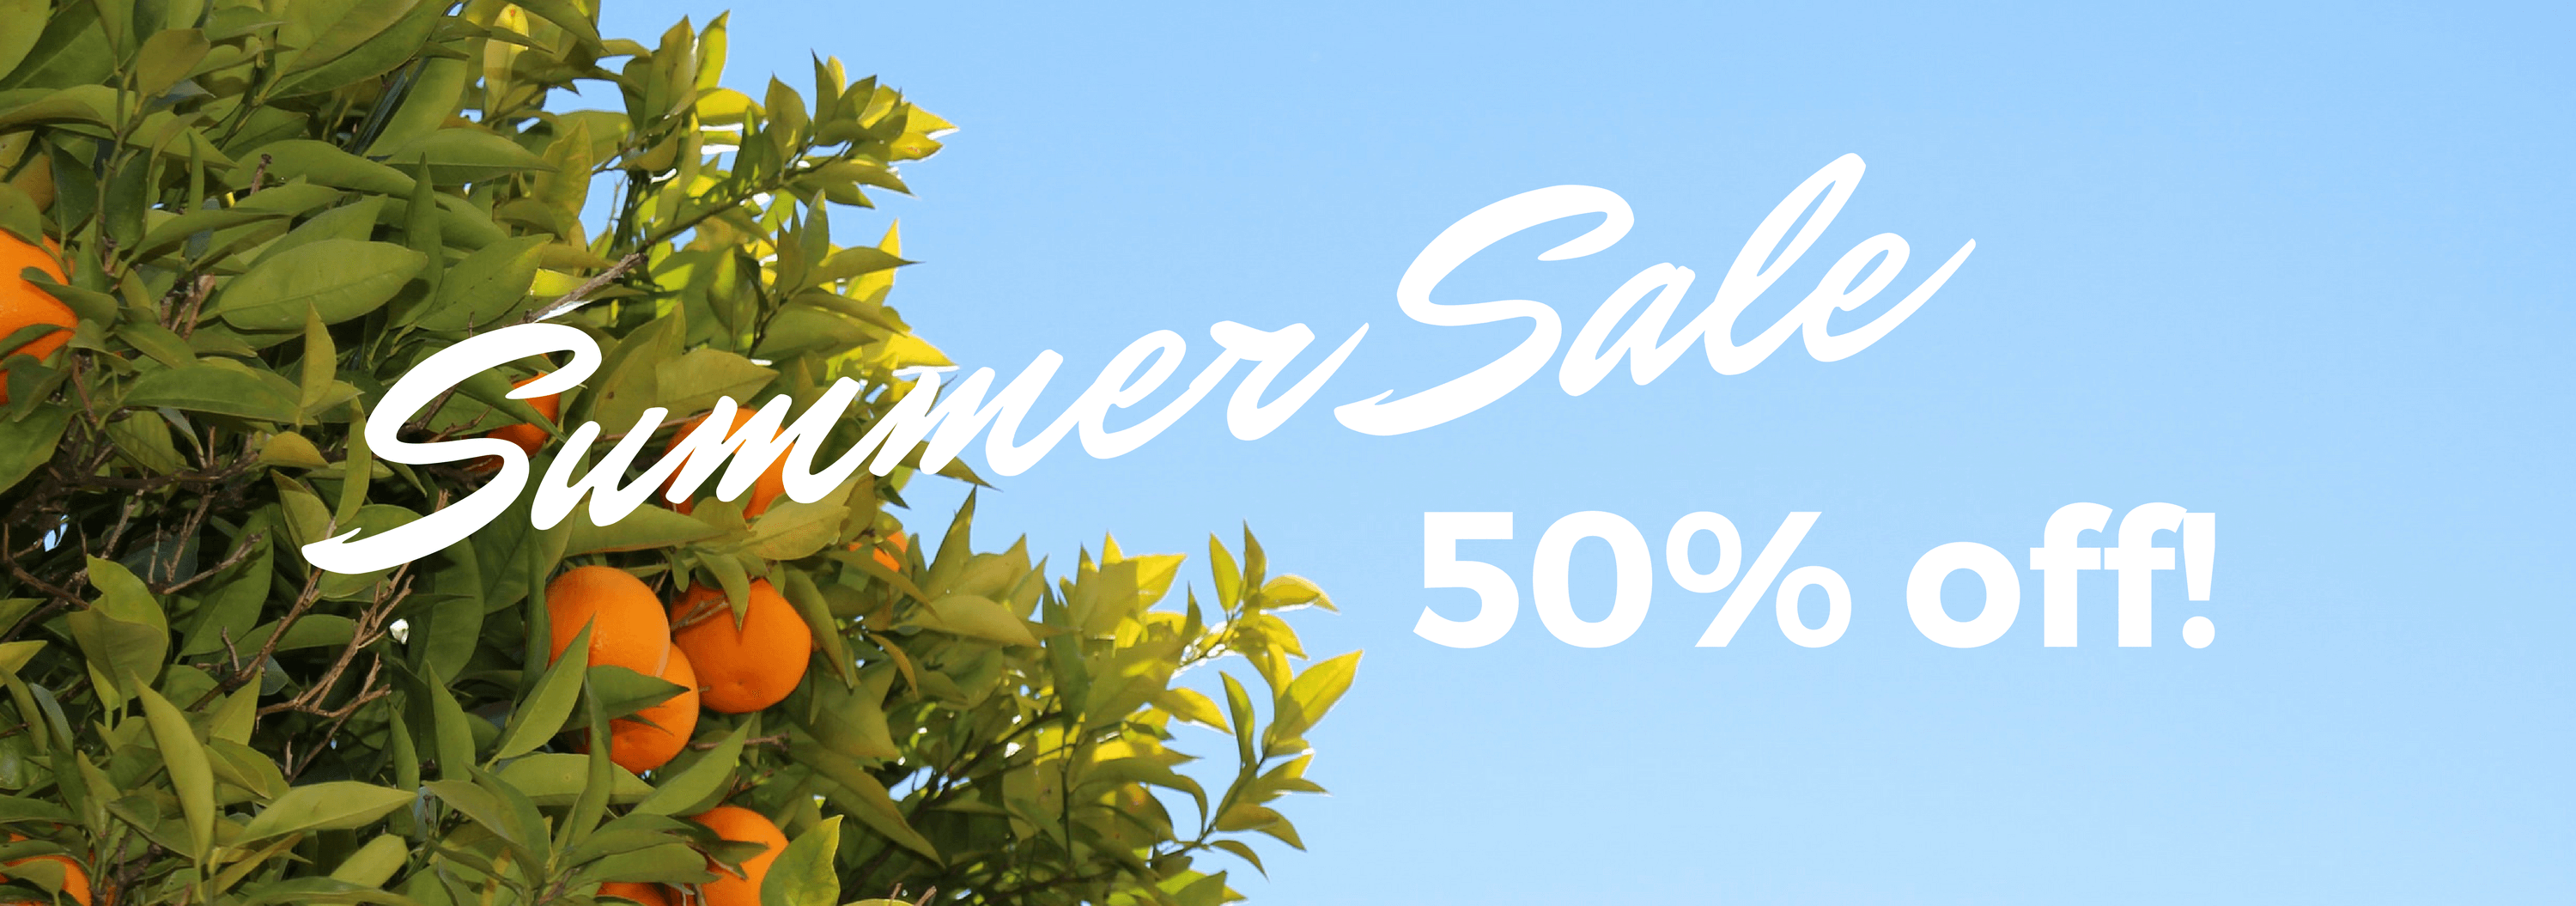 Summer sale: save up to 50% on your wellness!